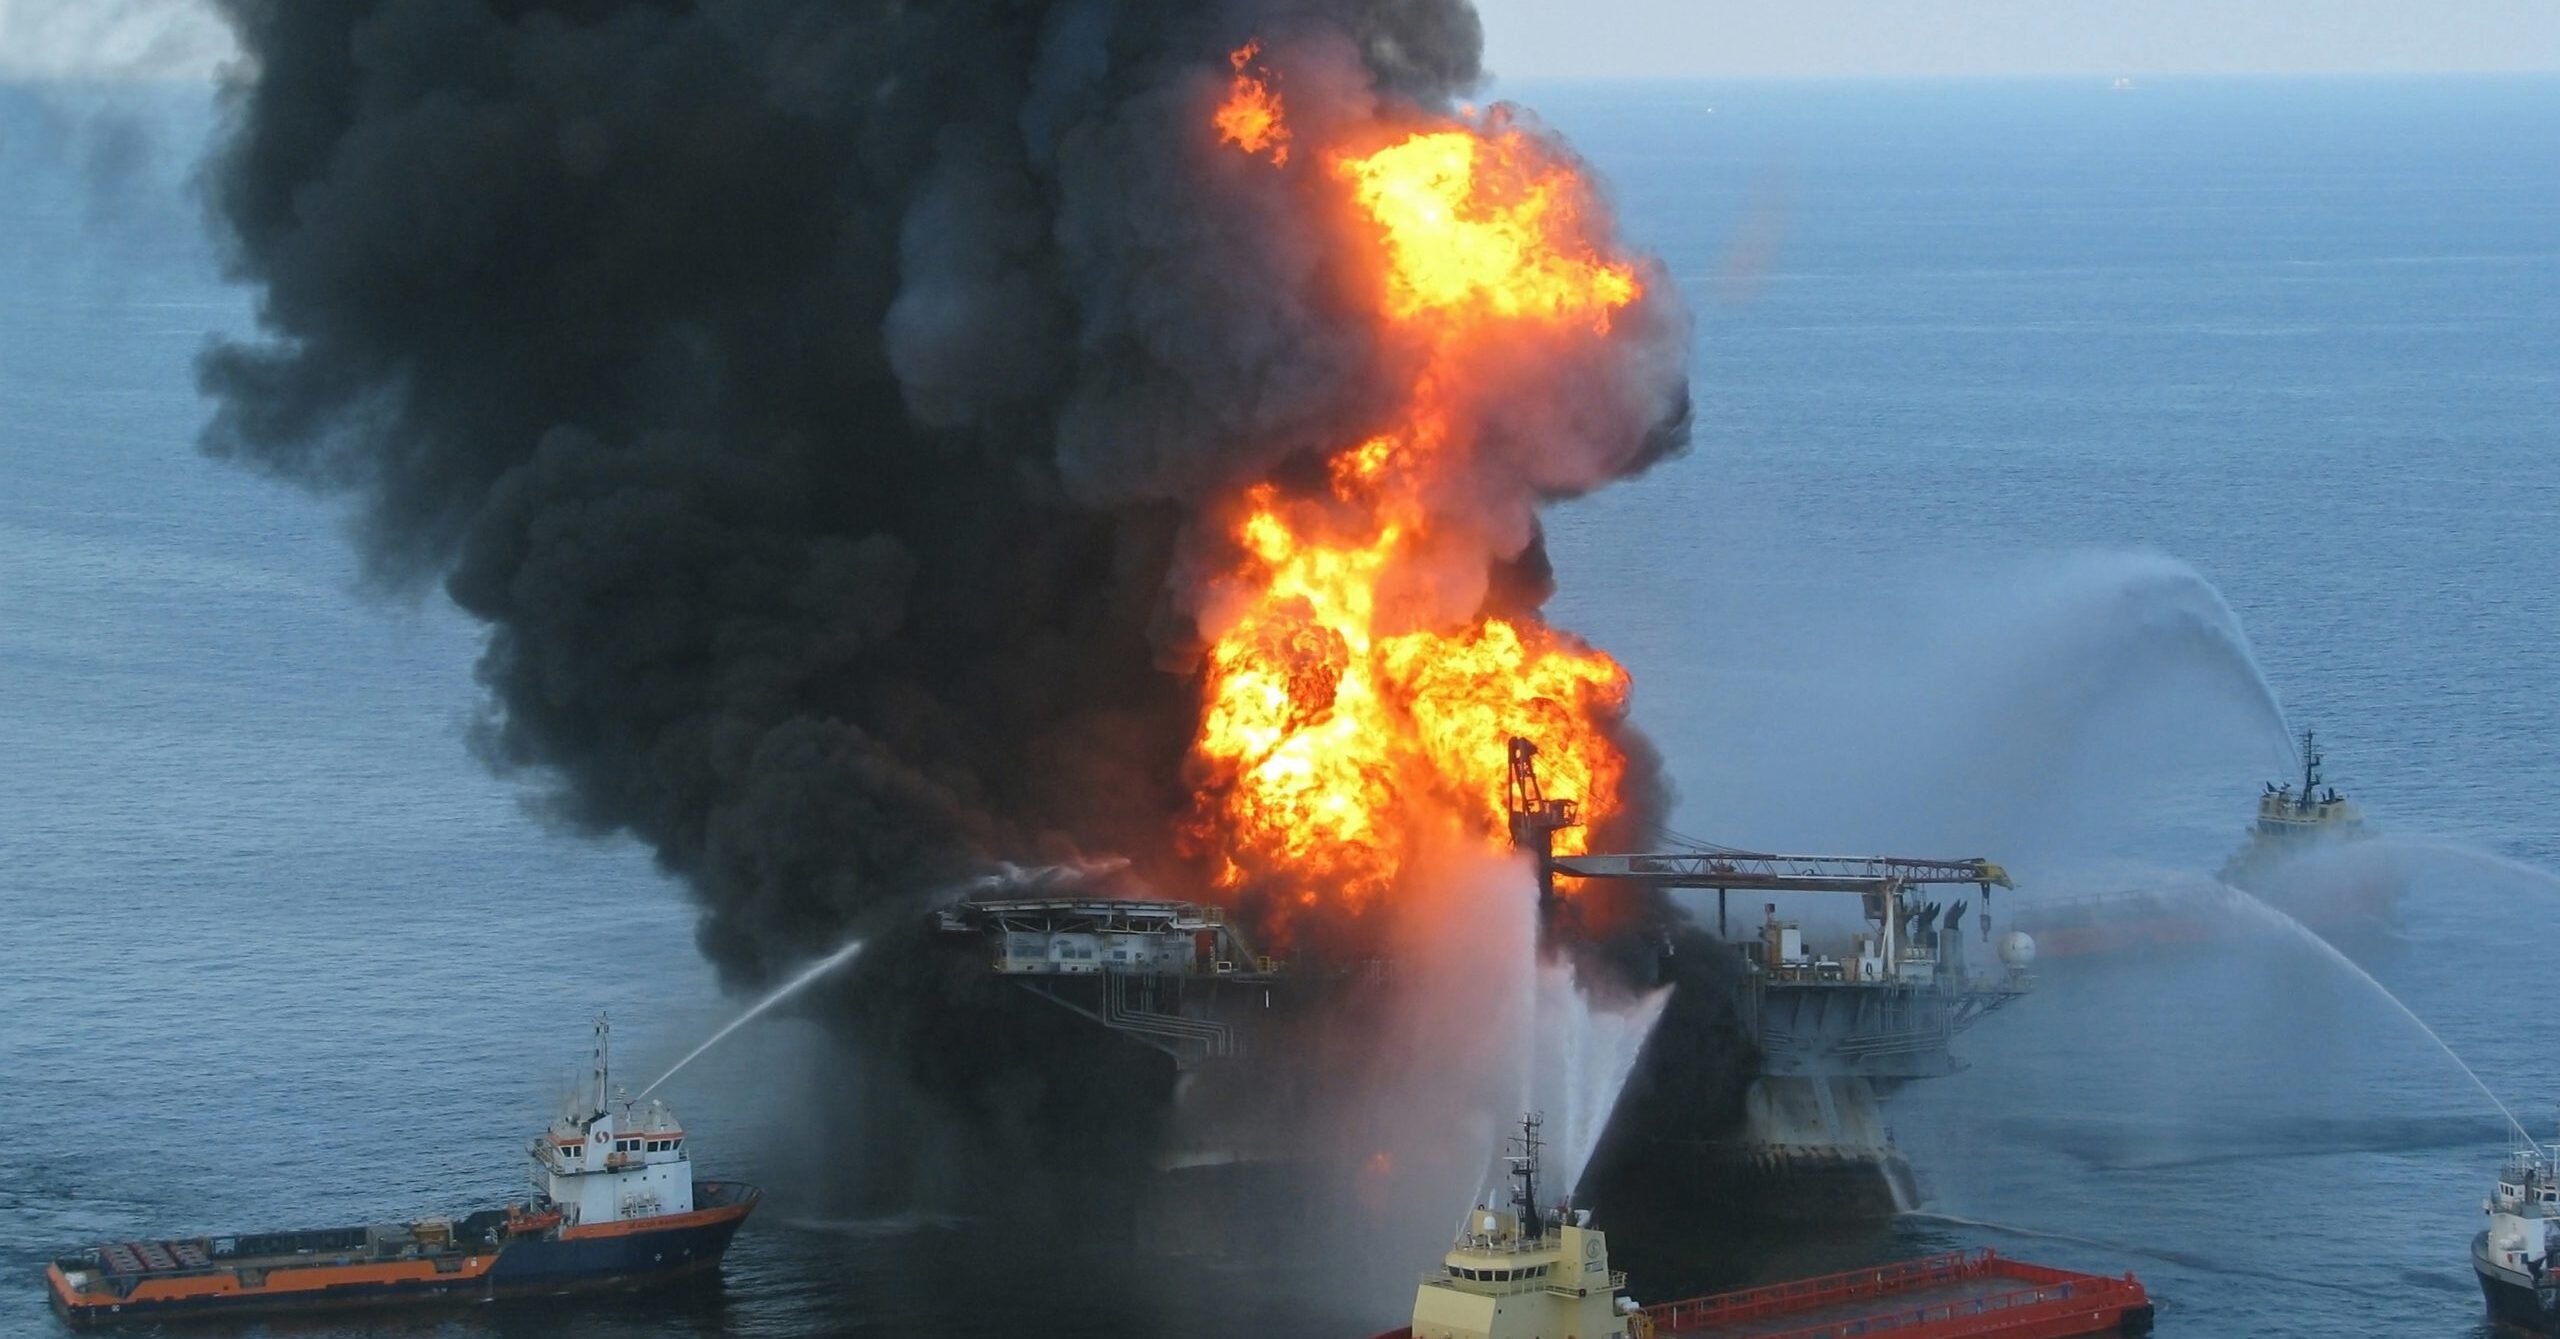 Deepwater Horizon offshore drilling unit on fire